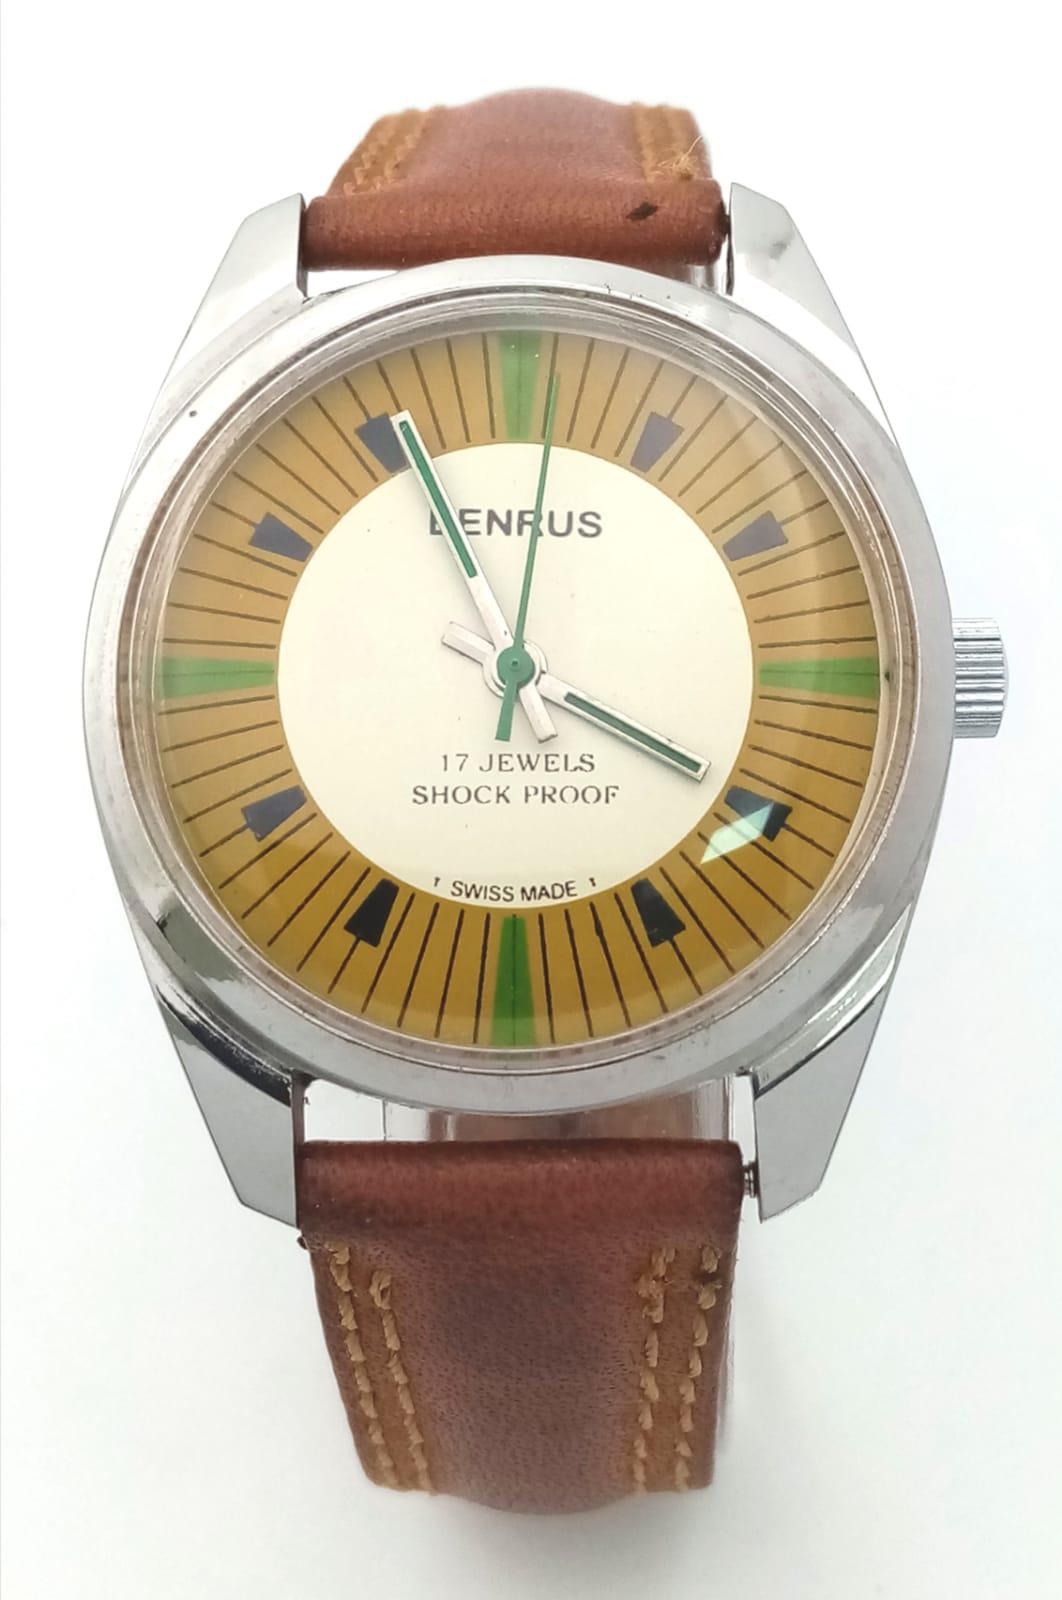 A Vintage Benrus Mechanical Gents Watch. Brown leather strap. Stainless steel case - 36mm. Two - Image 2 of 5